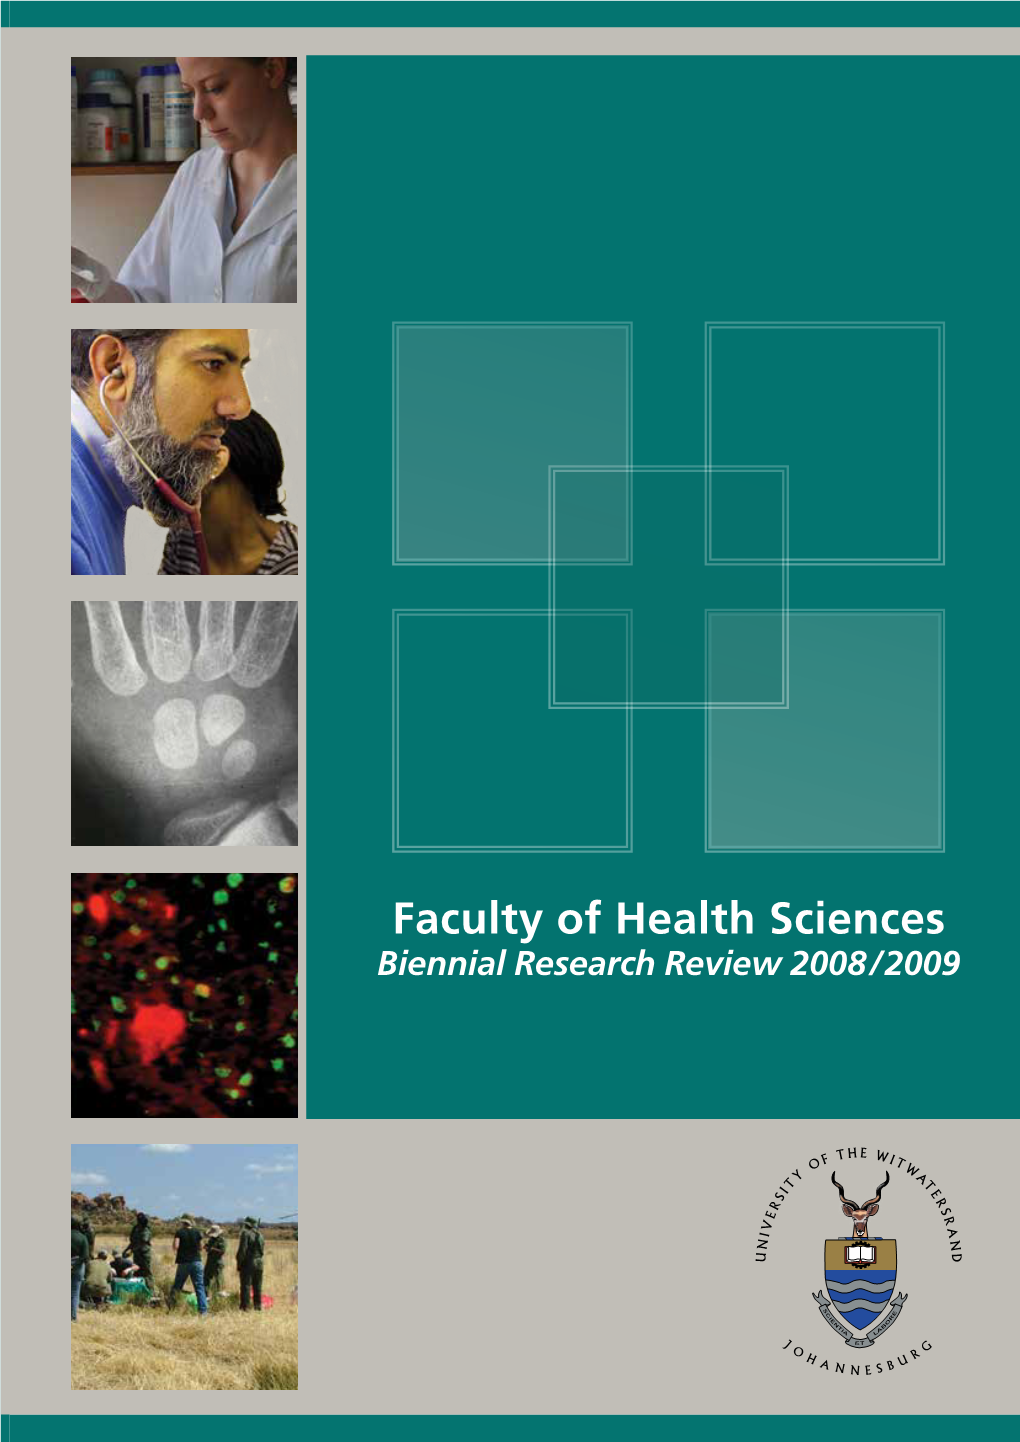 Faculty of Health Sciences Biennial Research Review 2008 / 2009